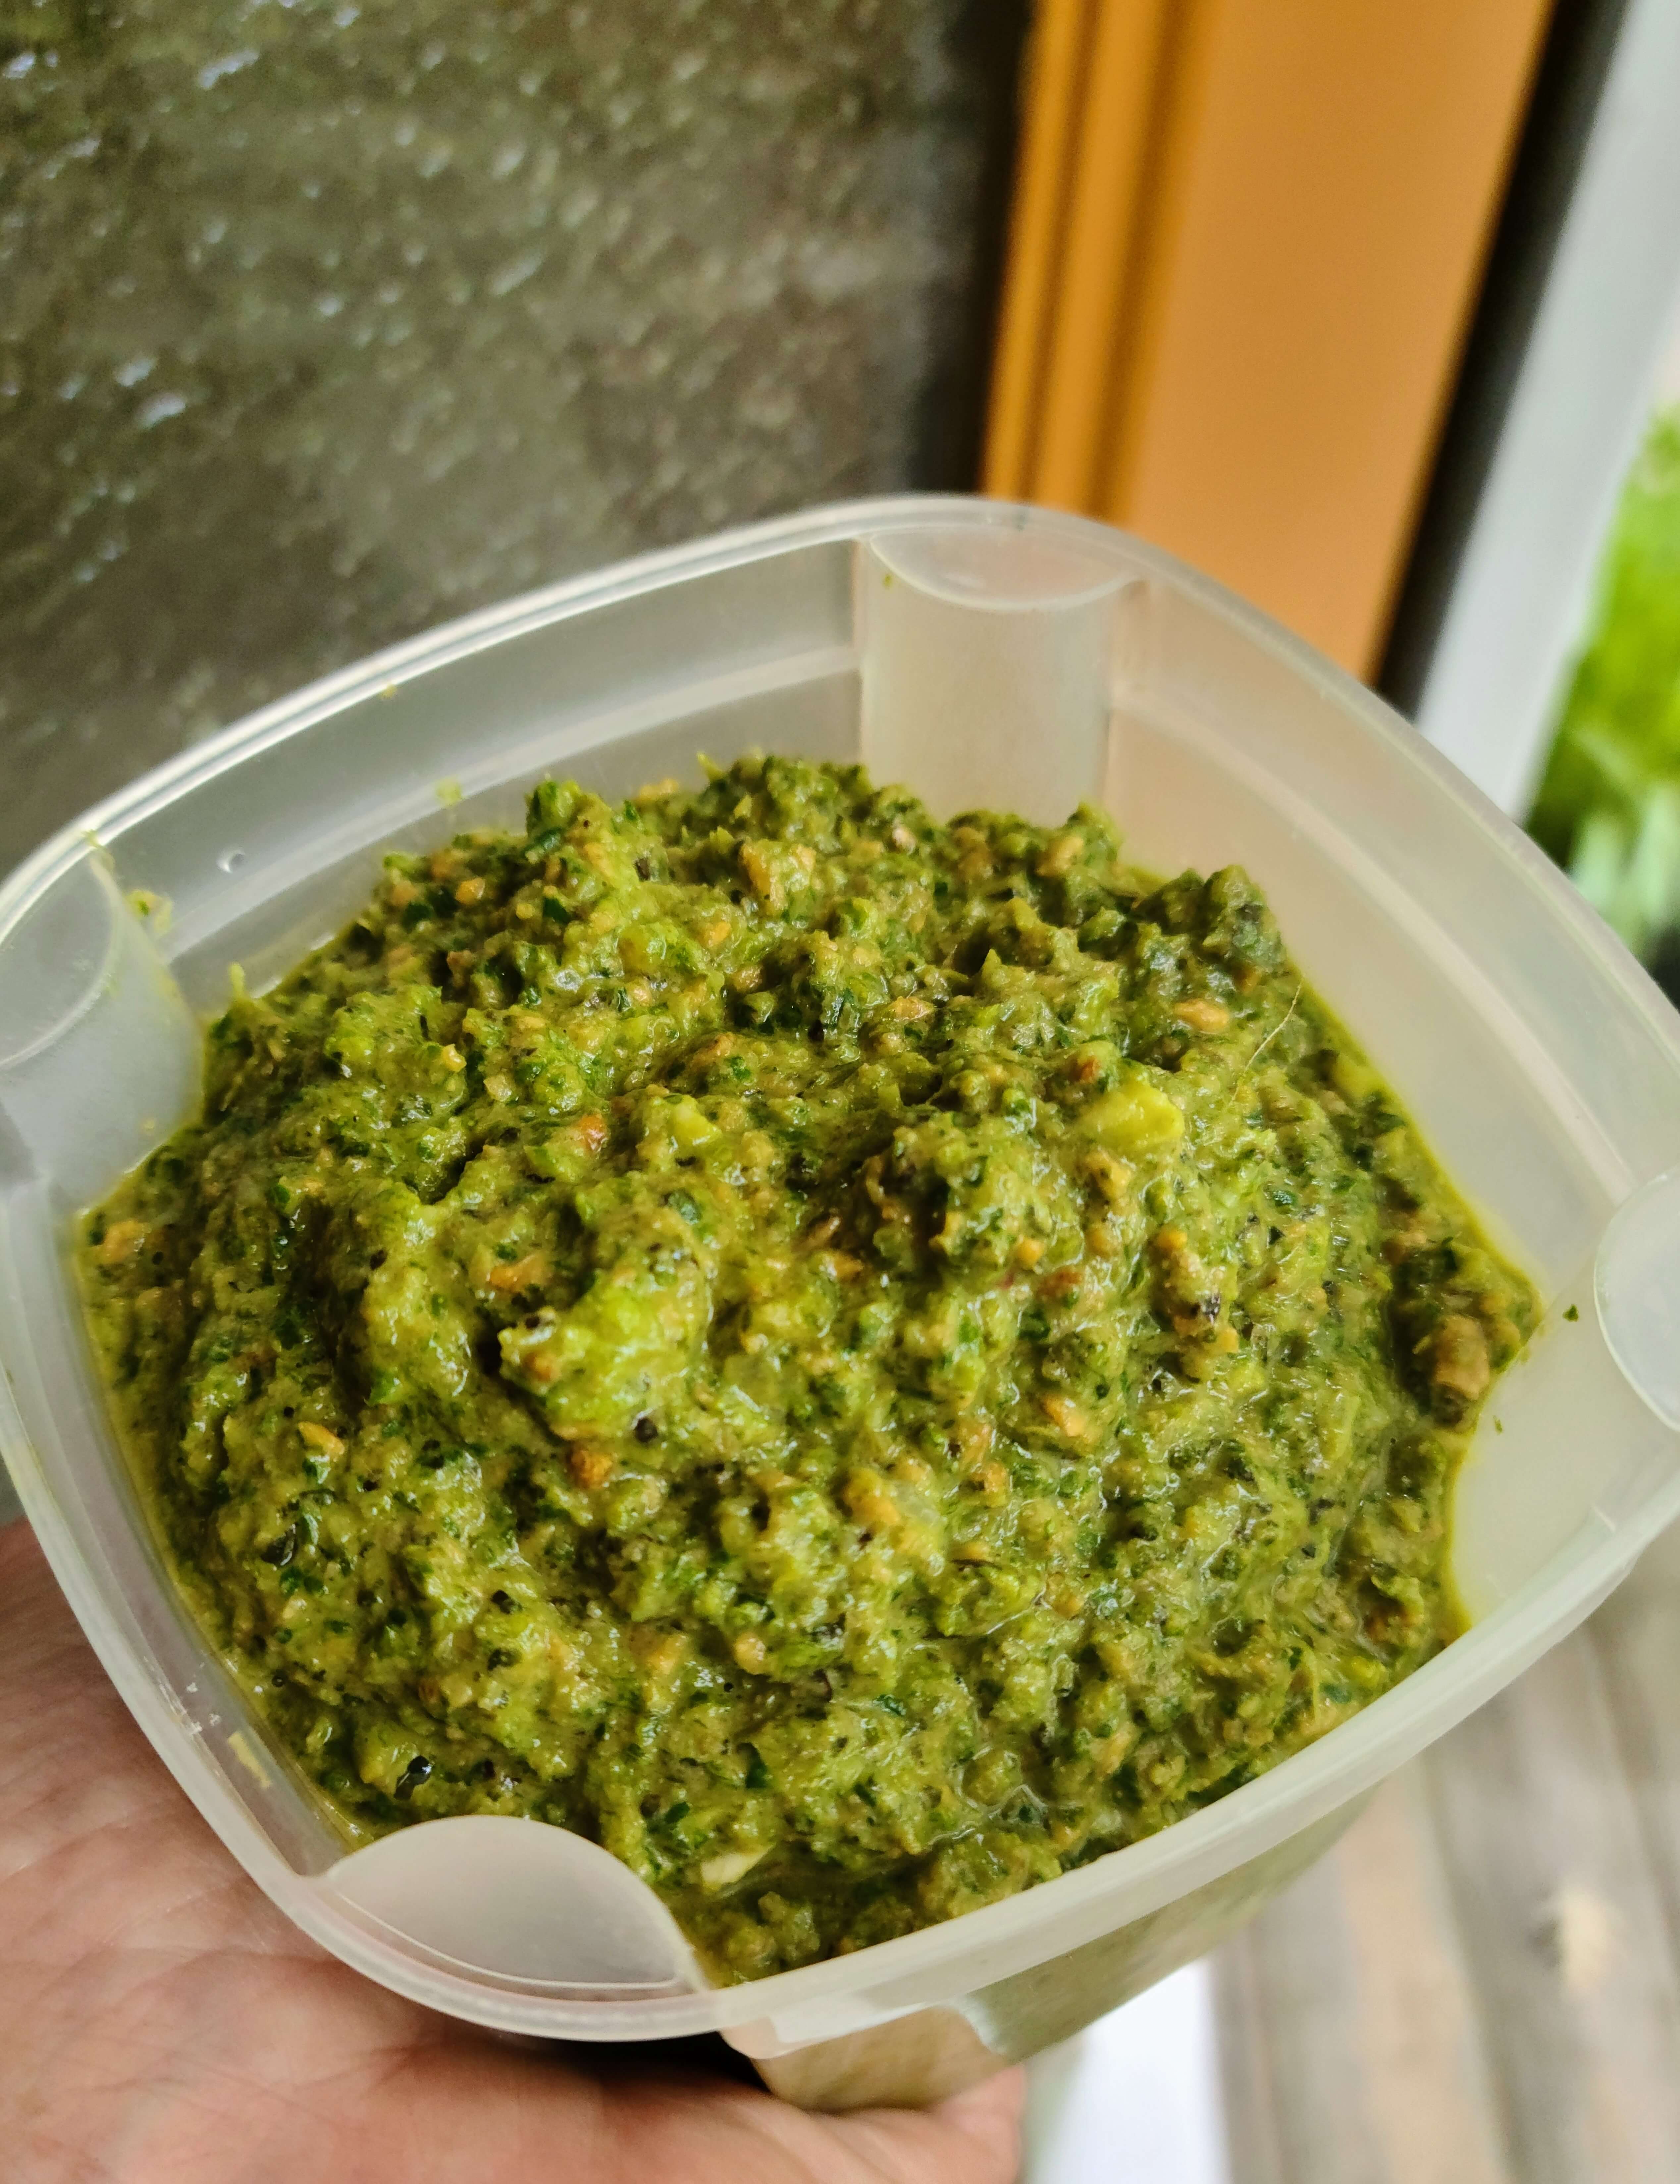 Lettuce Pesto–Why Didn’t I Think of This Before? (Vegan & Plant-Based)